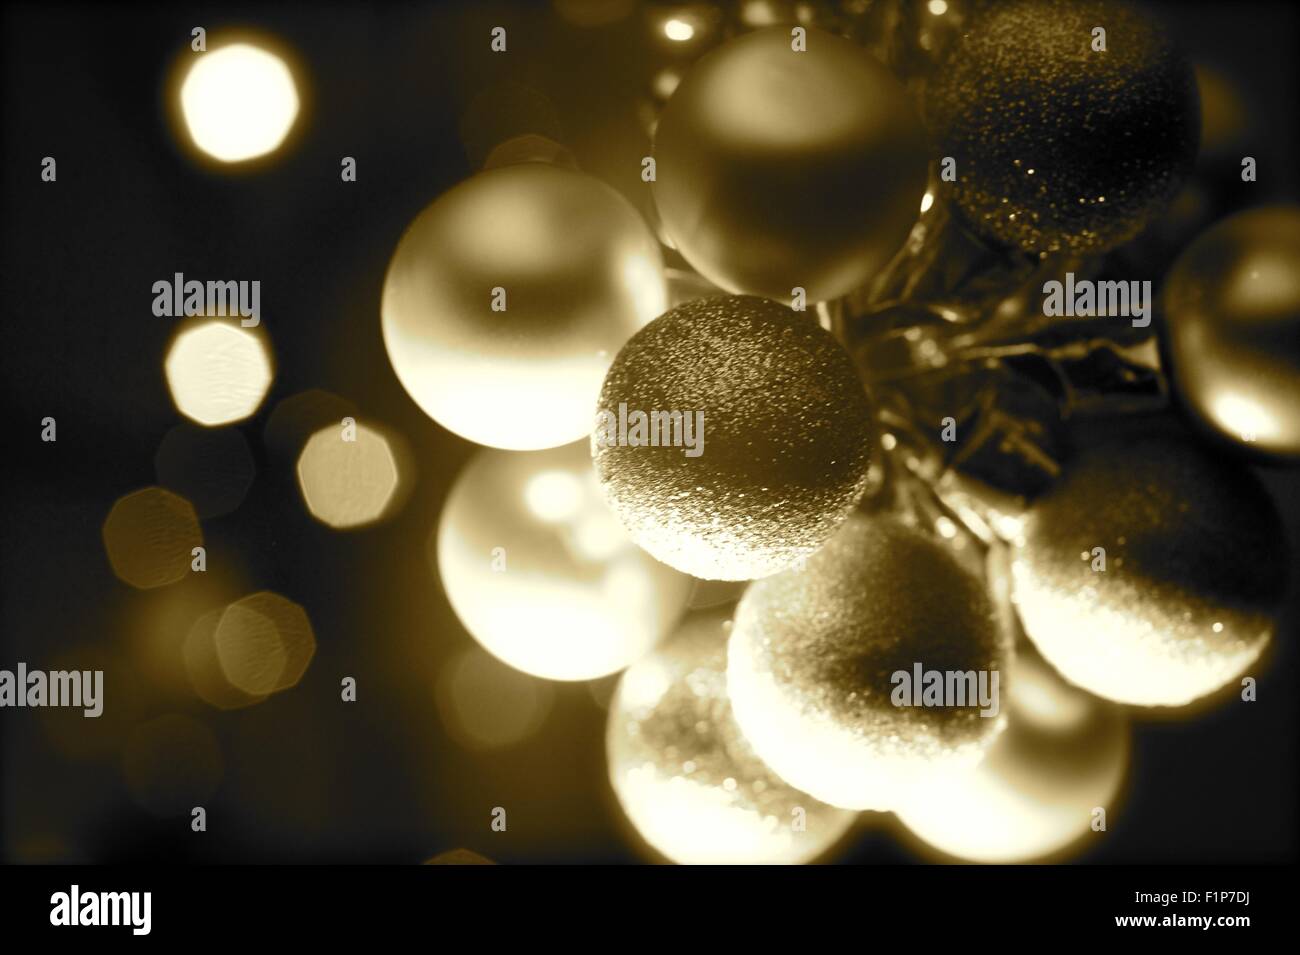 Holiday Ornaments Sephia Colors. Dark with Spot Lights. Golden Christmas Ornaments Stock Photo